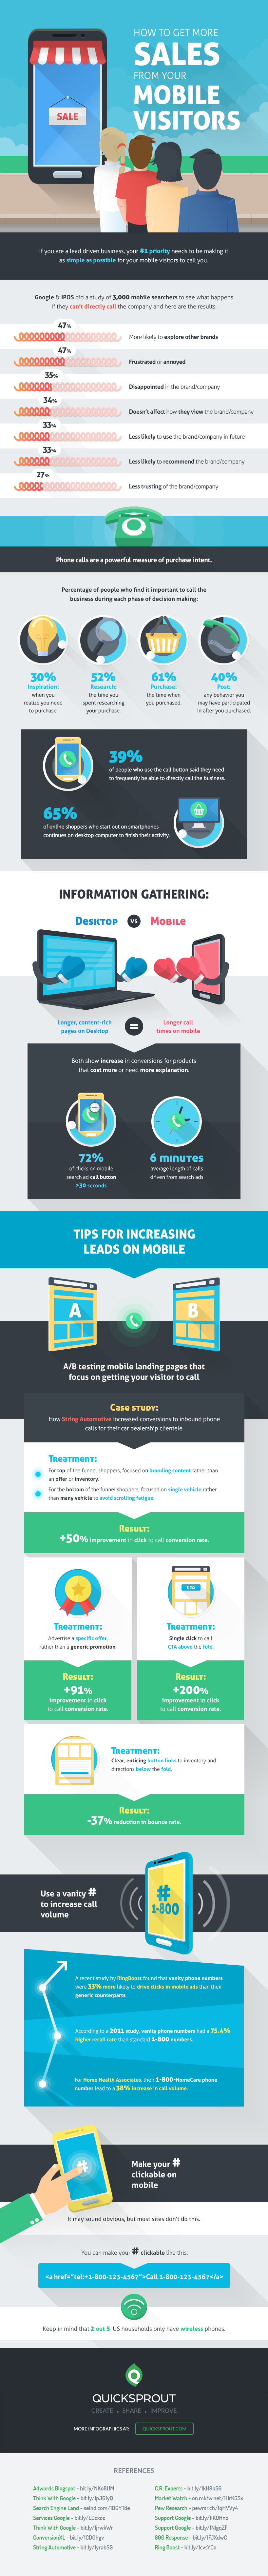 How to Get More Sales From Your Mobile Visitors